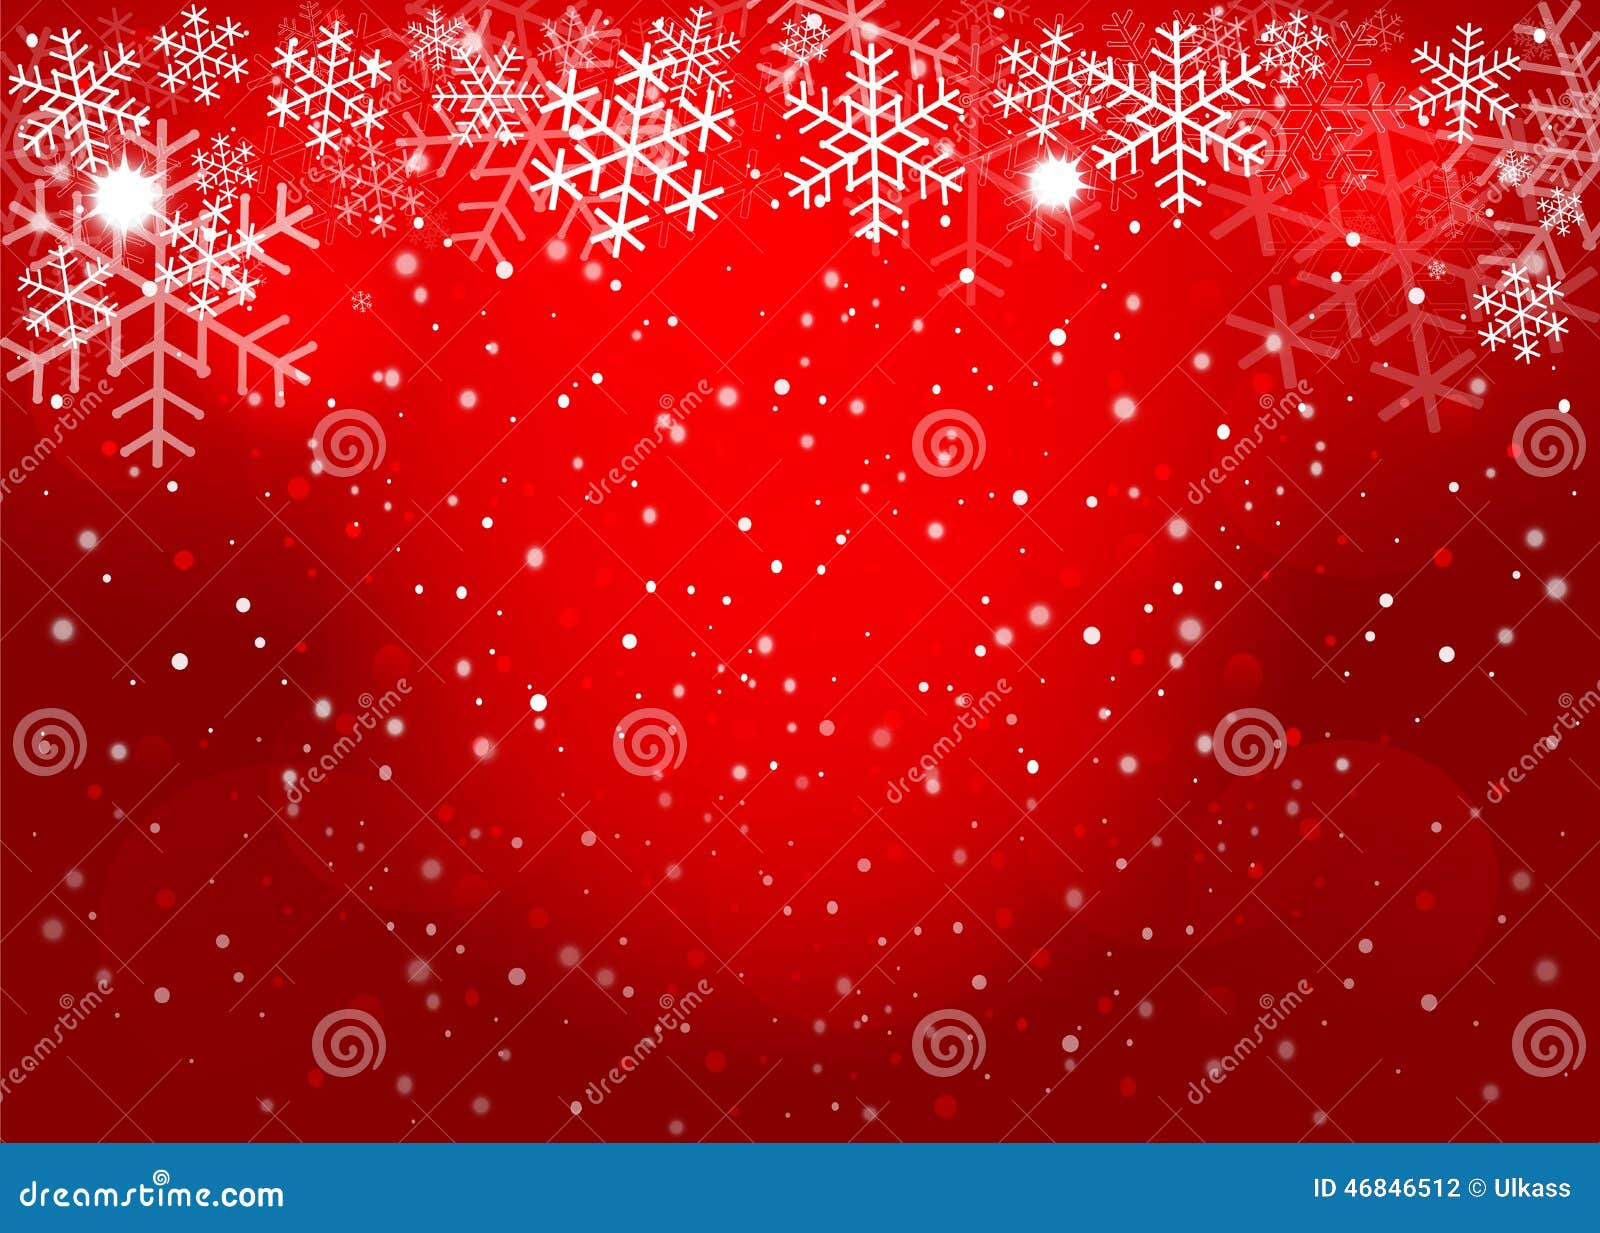 Download Red Christmas Background Stock Illustrations 436 884 Red Christmas Background Stock Illustrations Vectors Clipart Dreamstime SVG Cut Files